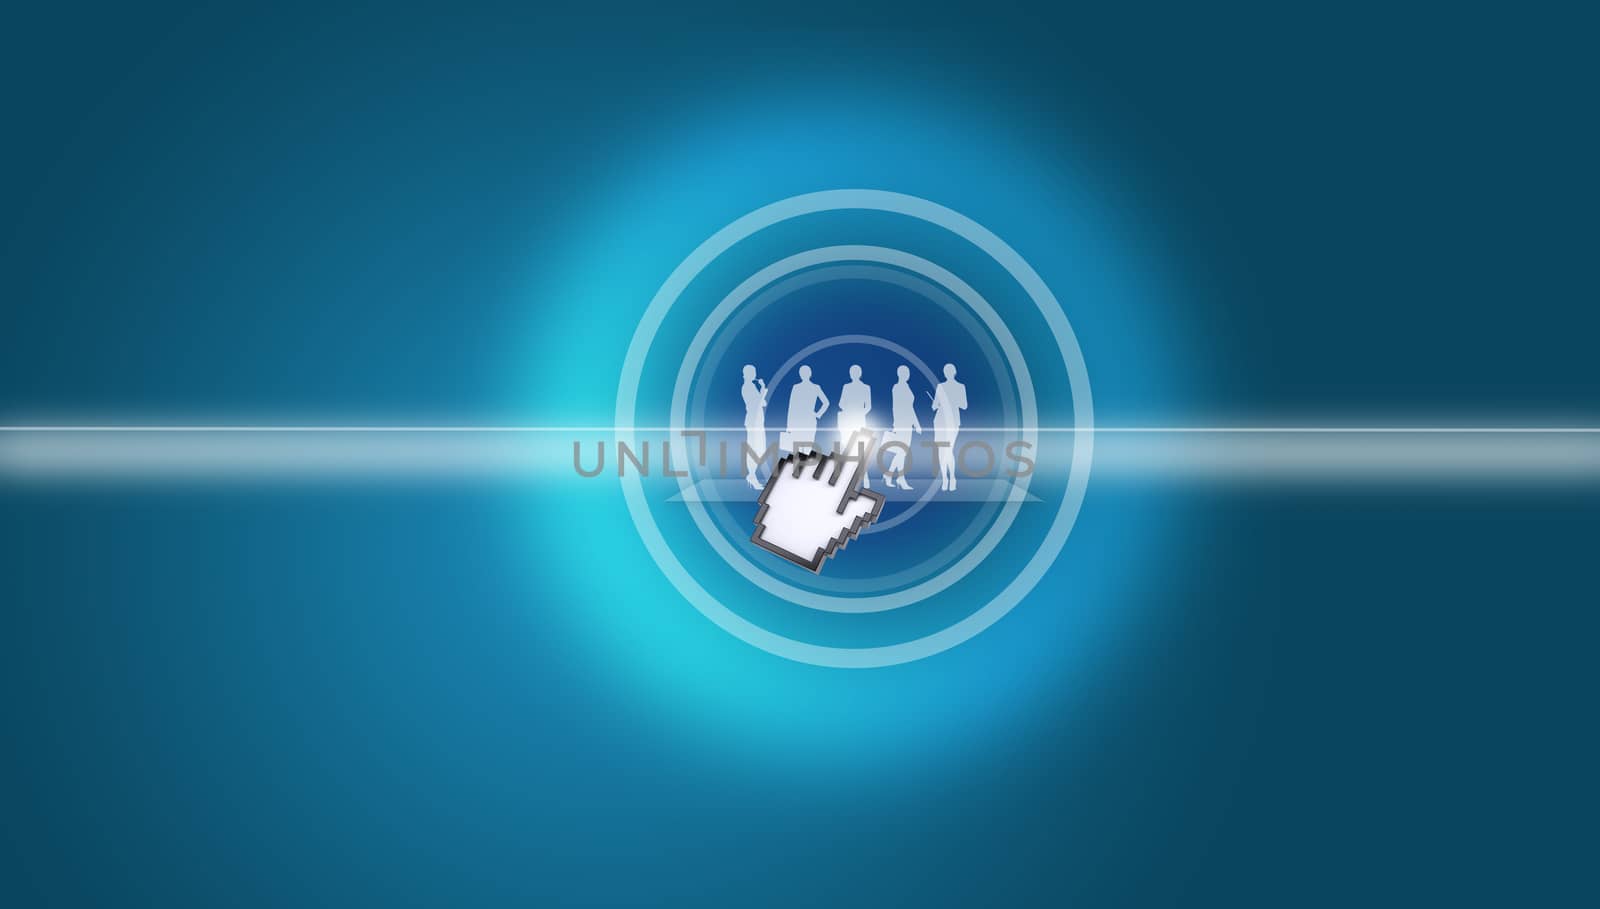 Cursor clicking on virtual people silhouettes on abstract blue background